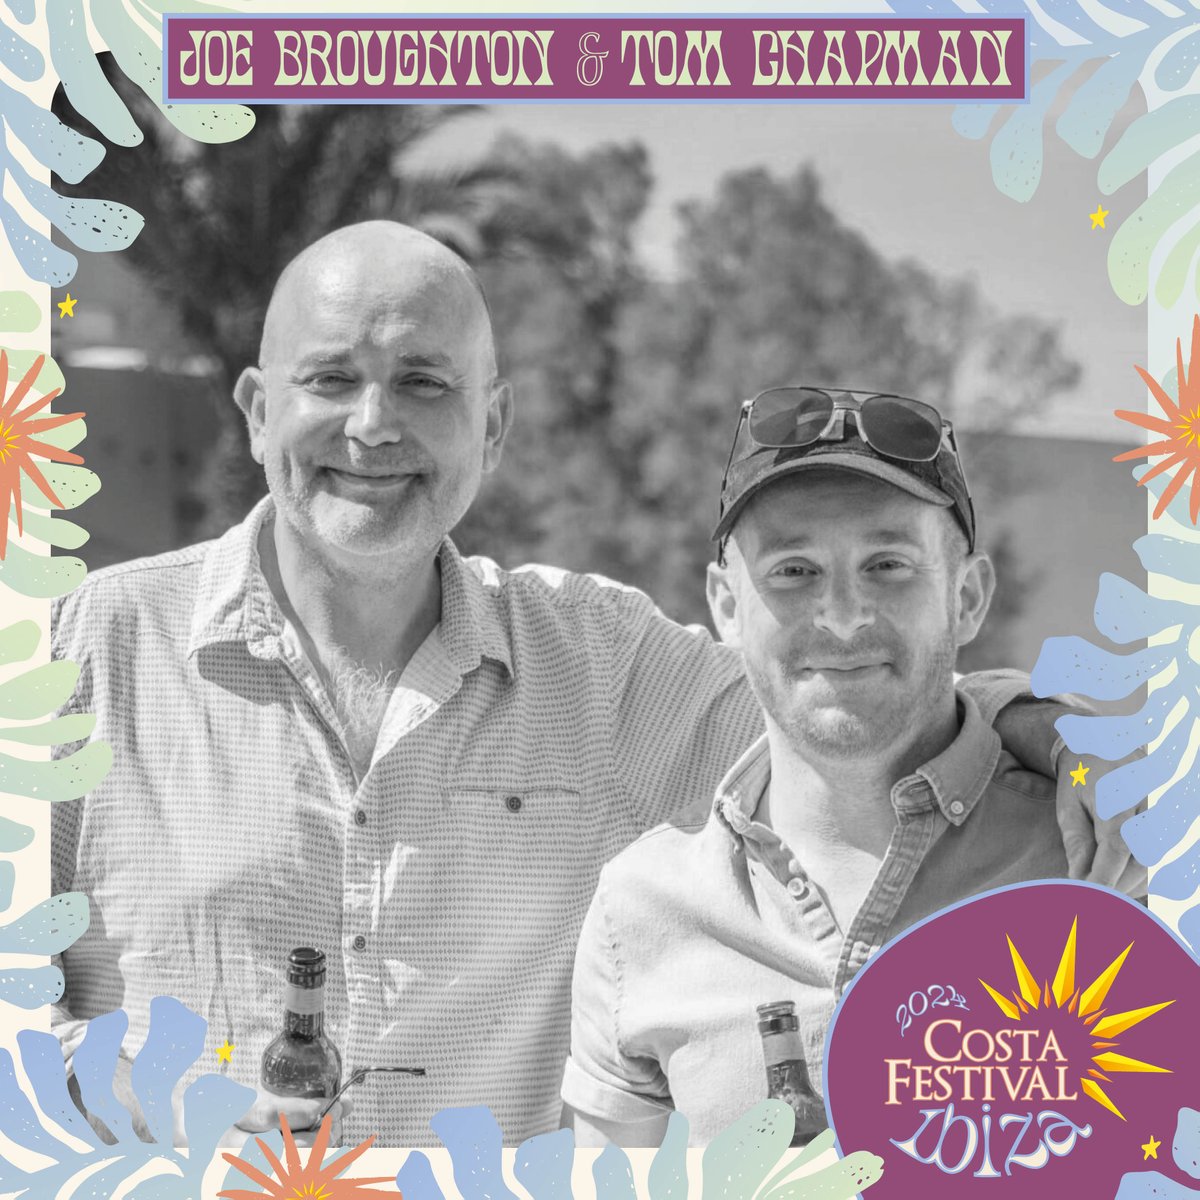 Two icons in the folk scene are Joe Broughton and Tom Chapman. This duo have been an enduring musical partnership since 2003. They’re folk but not as you know it🎶 If you haven't already booked for Ibiza make sure you don't miss out👇☀ costafestival.co.uk/costa-festival…